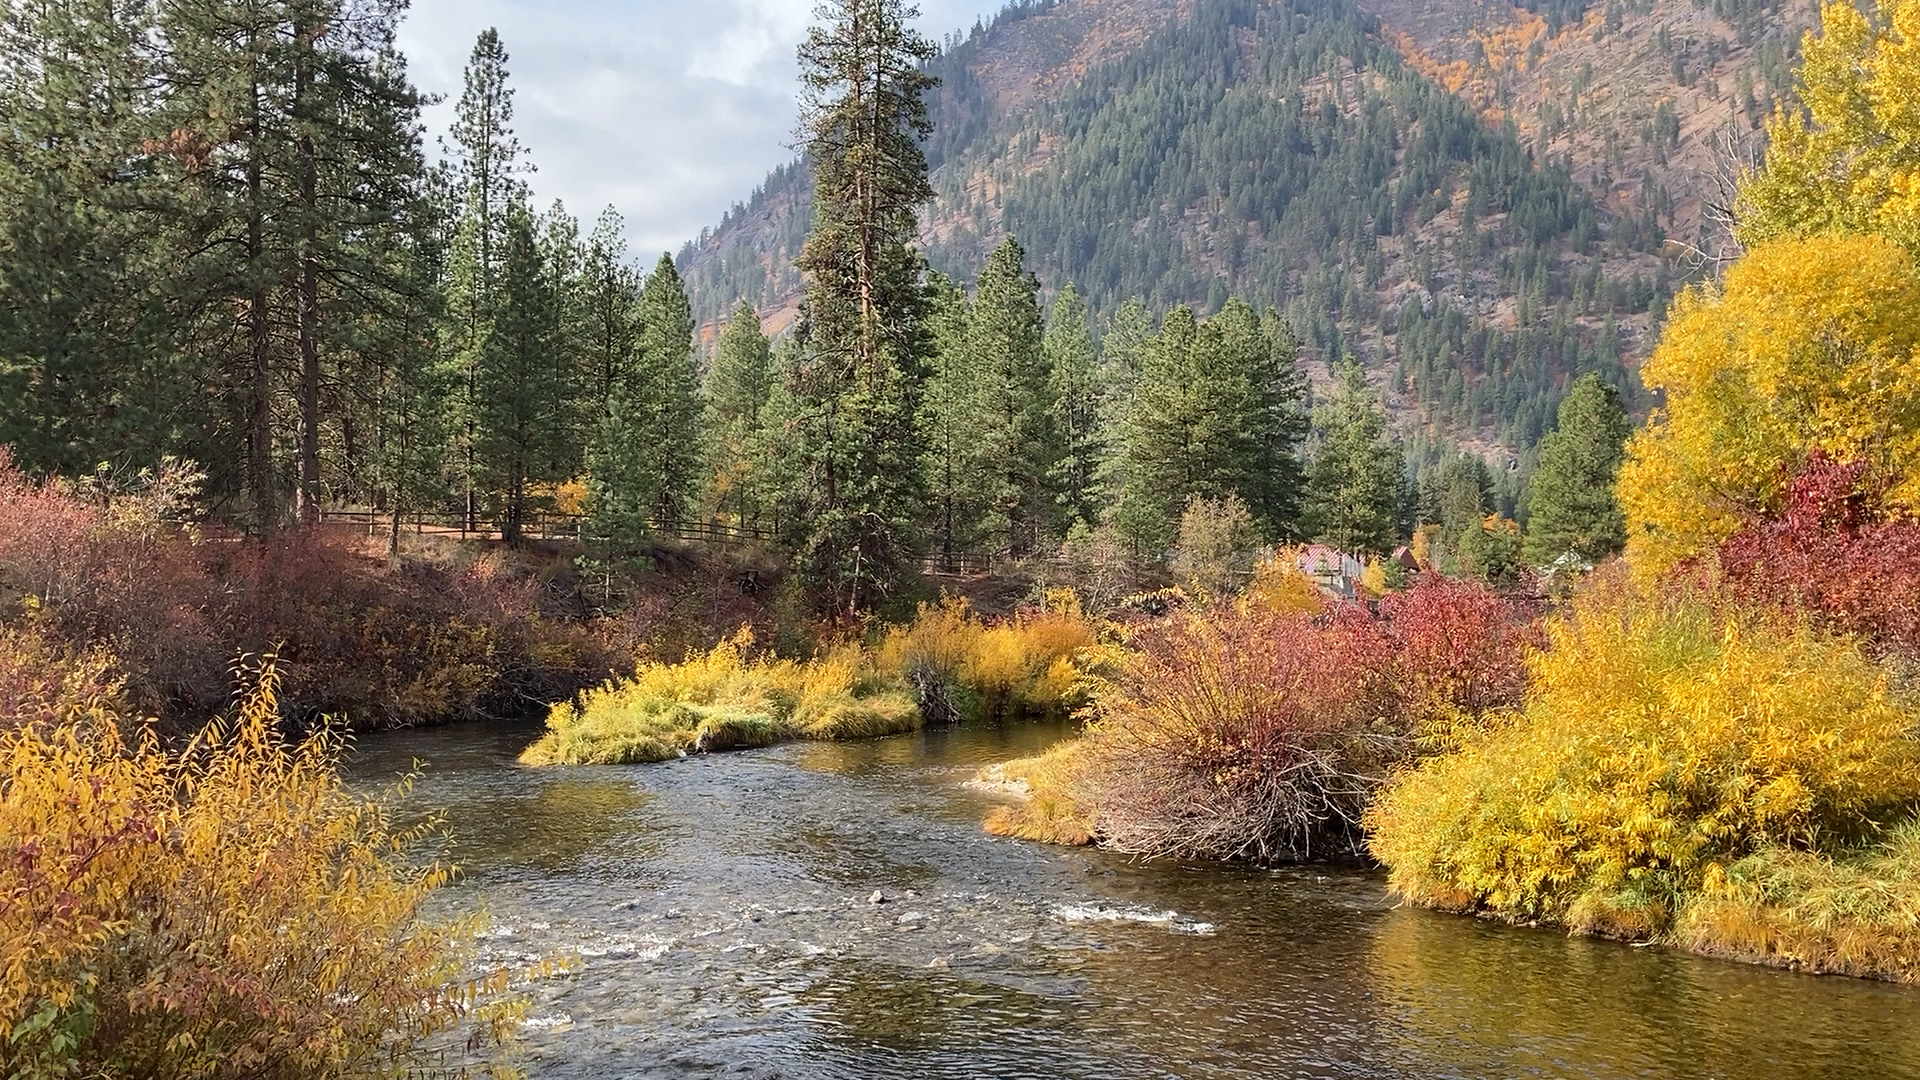 Spawning salmon and incredible fall colors at Icicle Creek in central Washington.